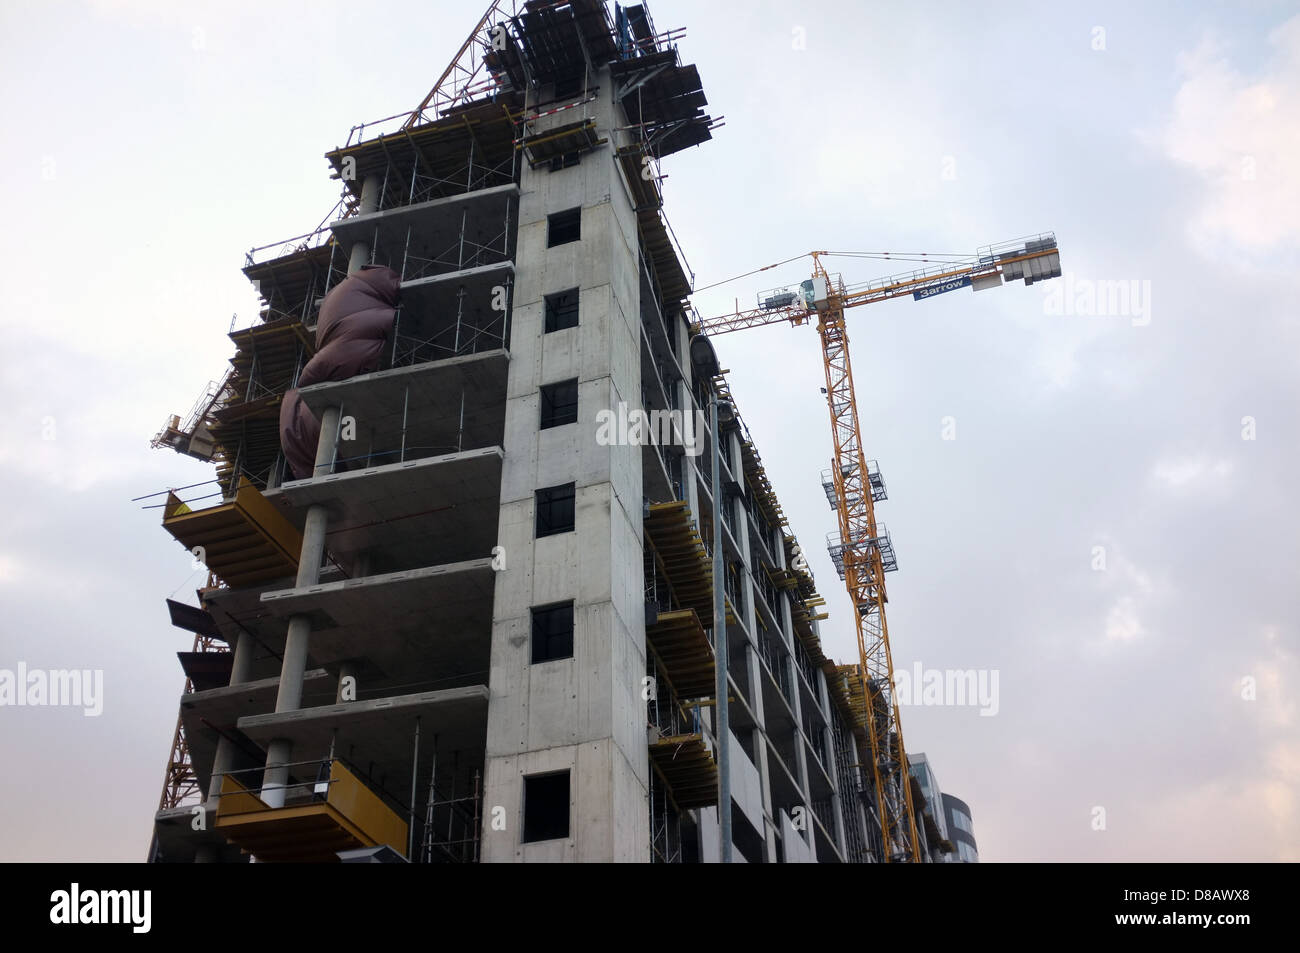 A tall crane towers over a office building under construction in Johannesburg, South Africa. Stock Photo